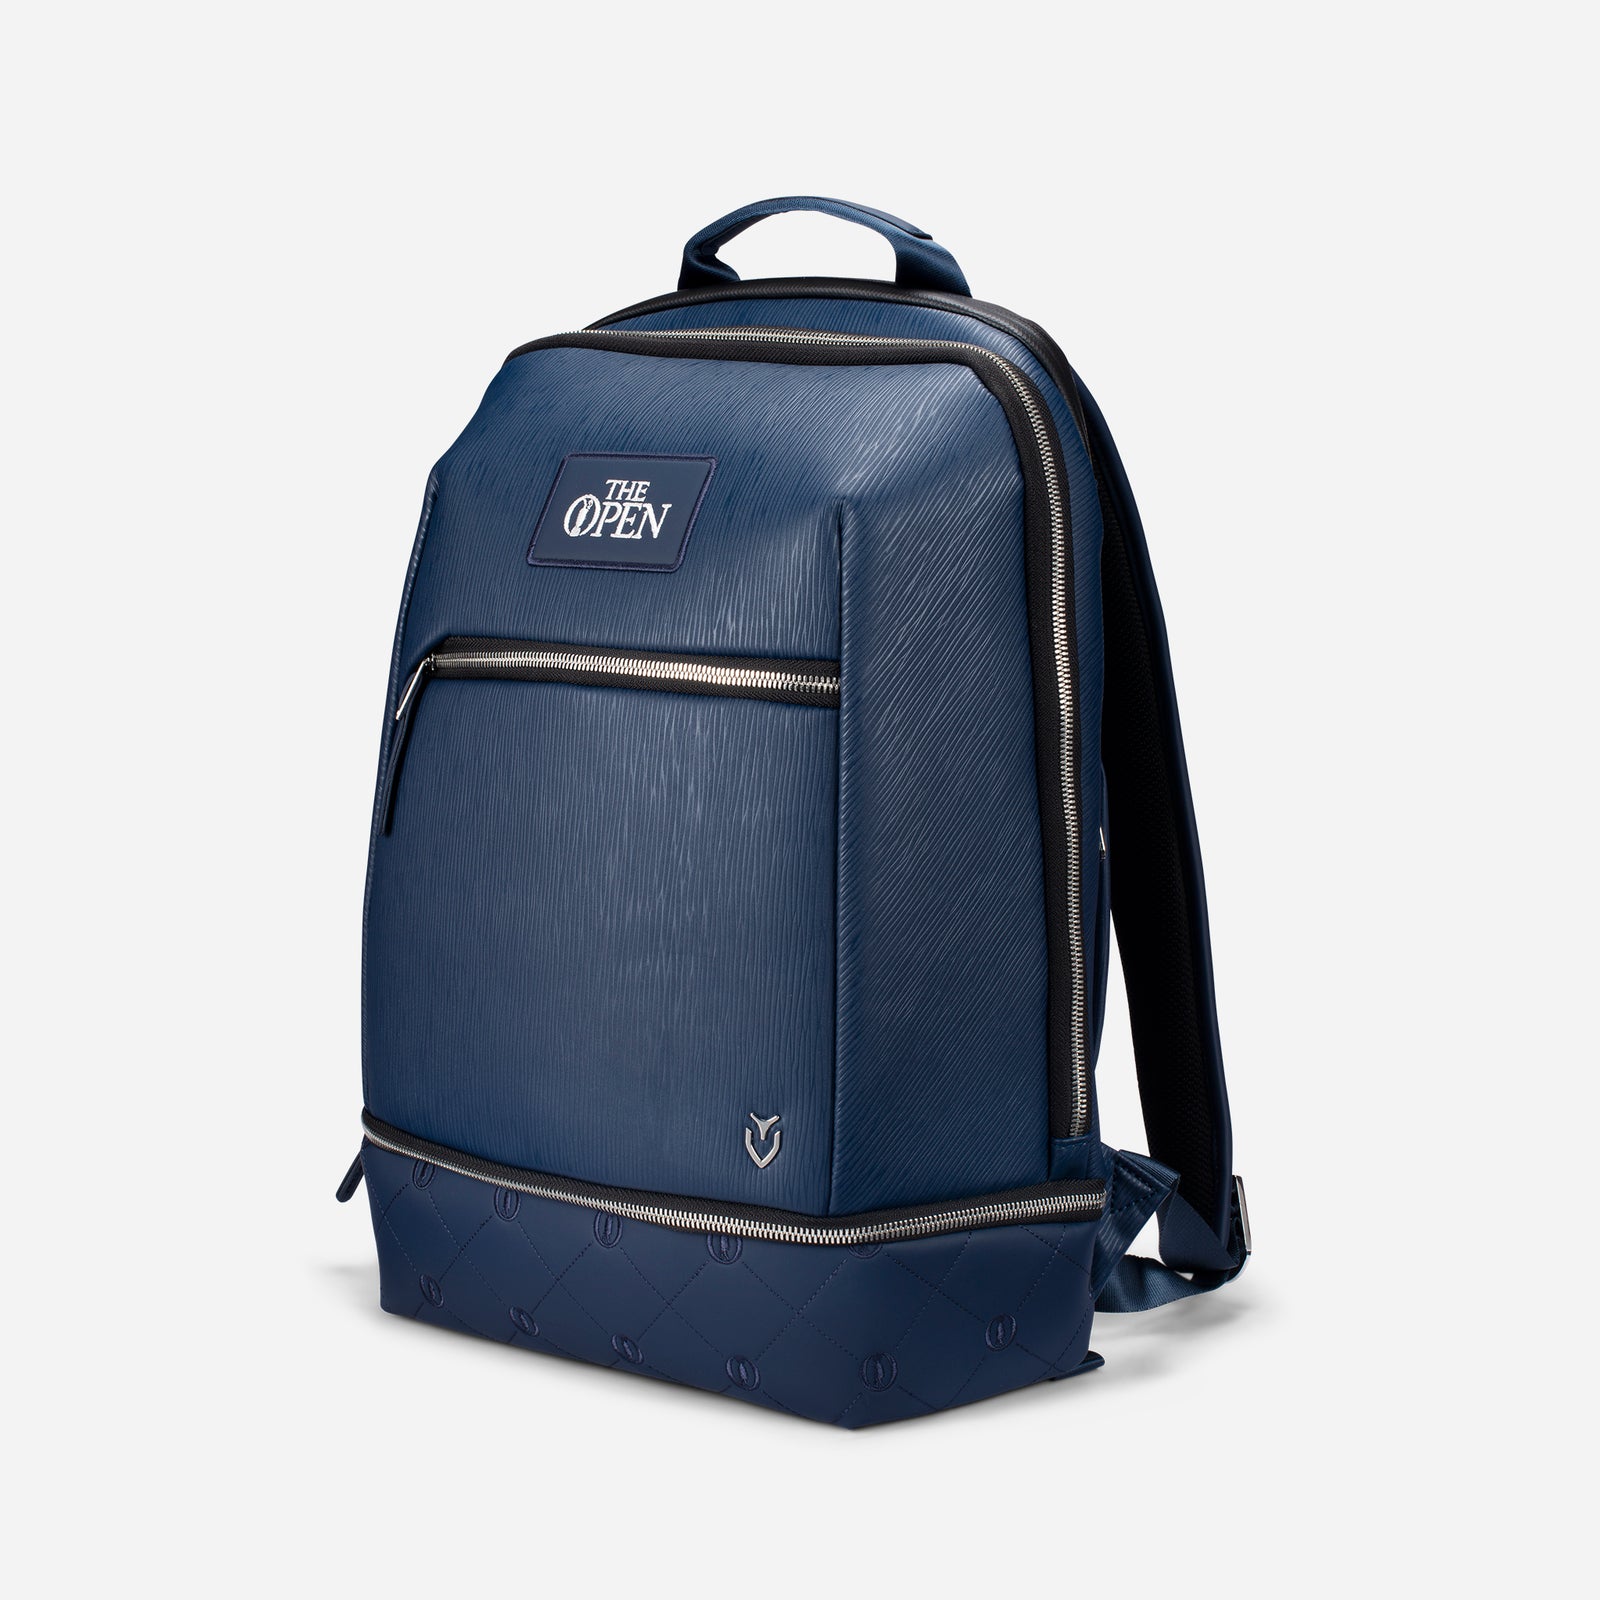 The Open x VESSEL Signature Backpack